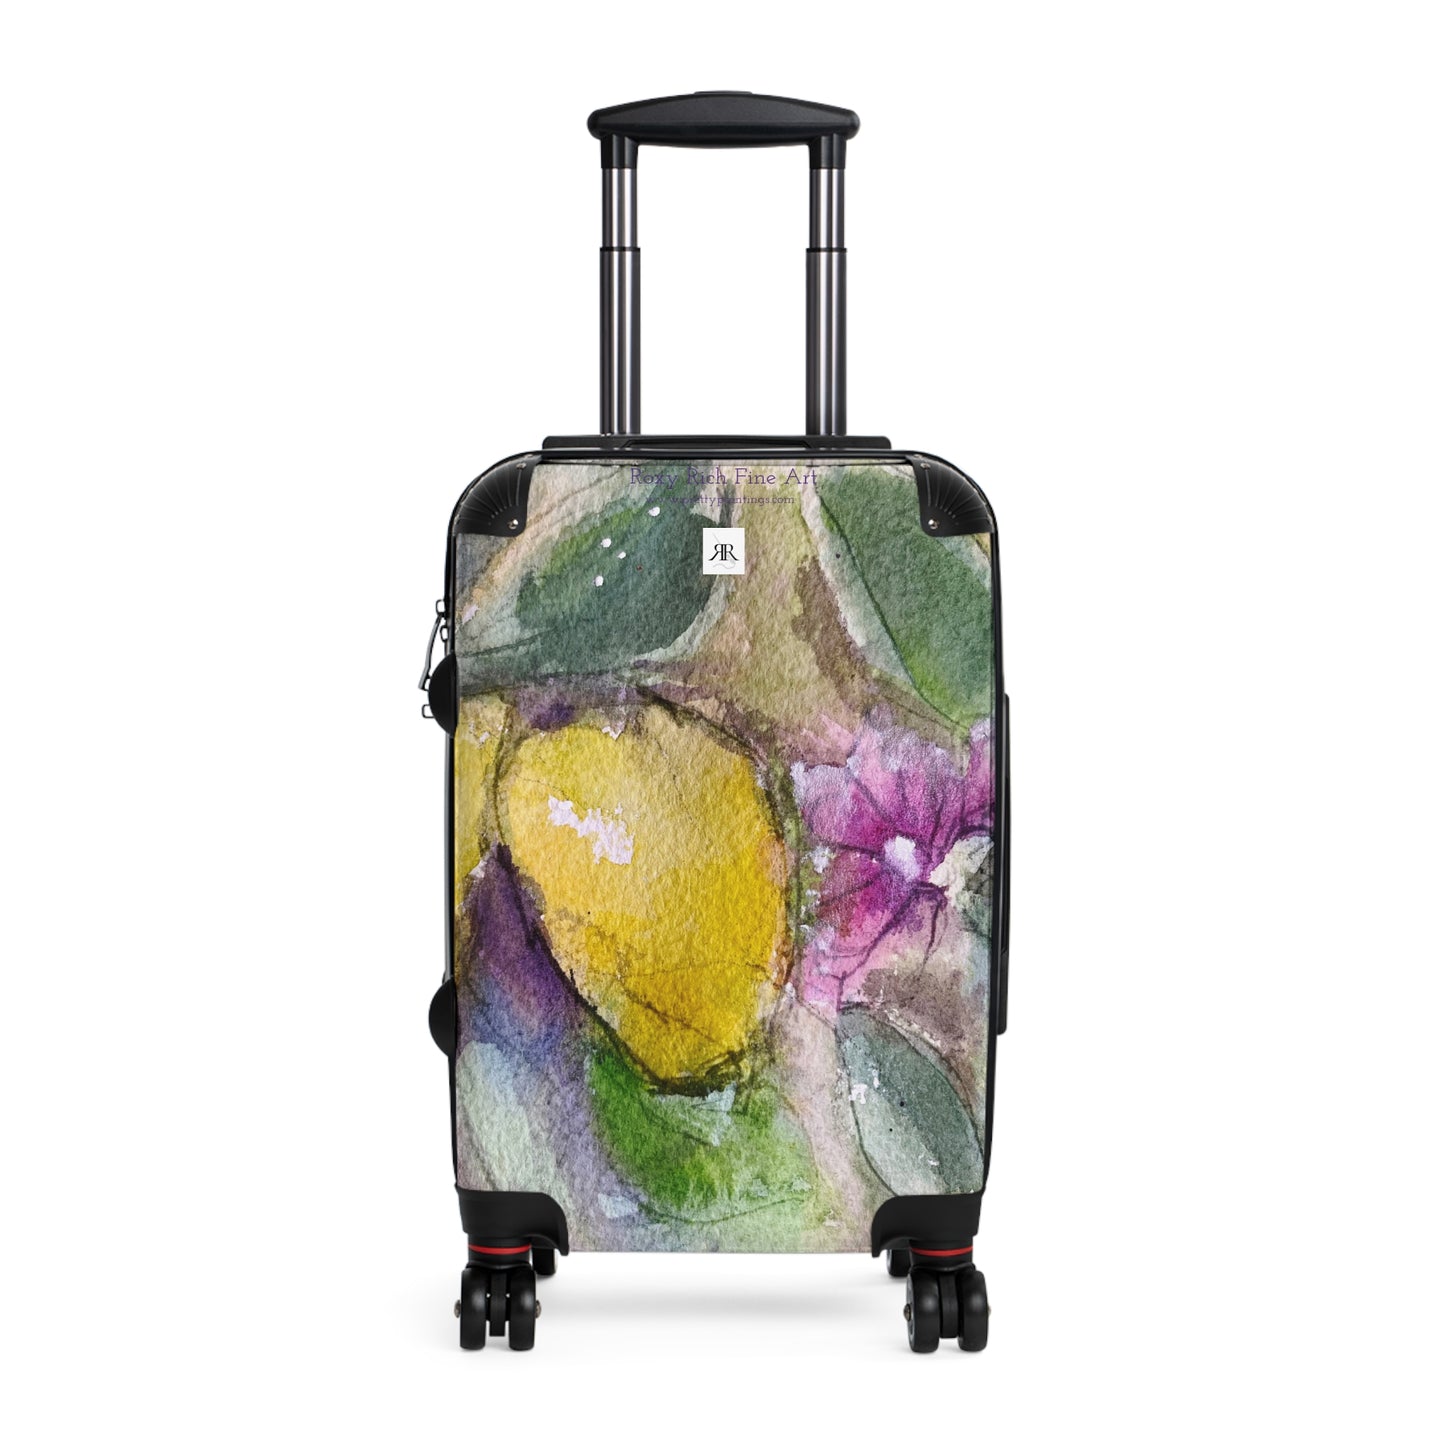 "Loose Lemons" Carry on Suitcase